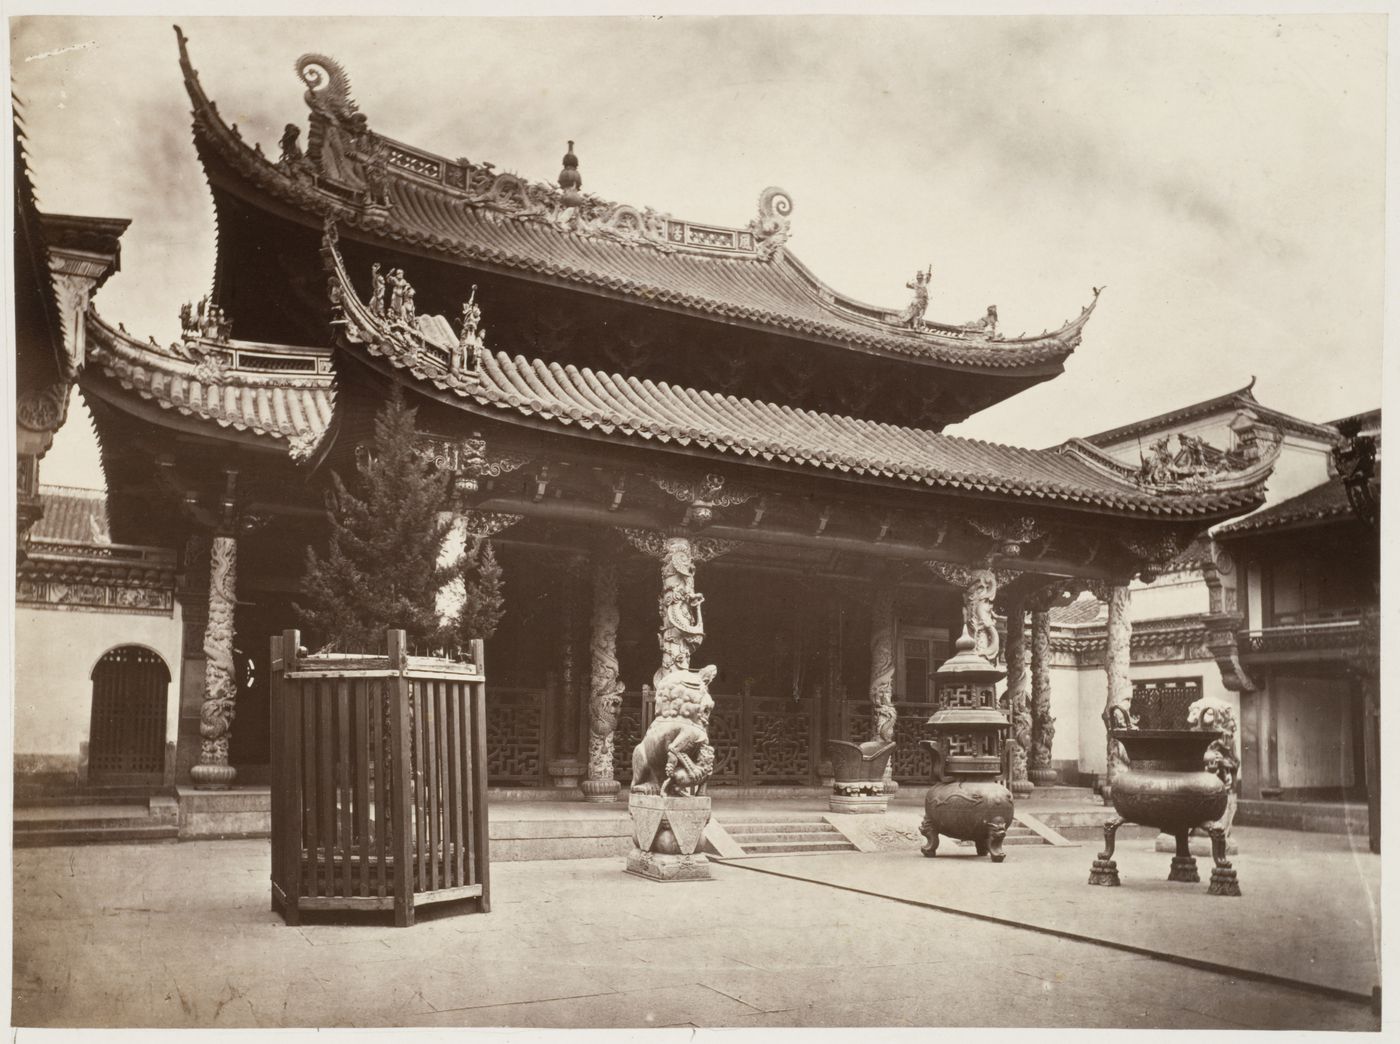 View of the interior court of the Fujian Guild Hall, Ningpo (now Ningbo), China